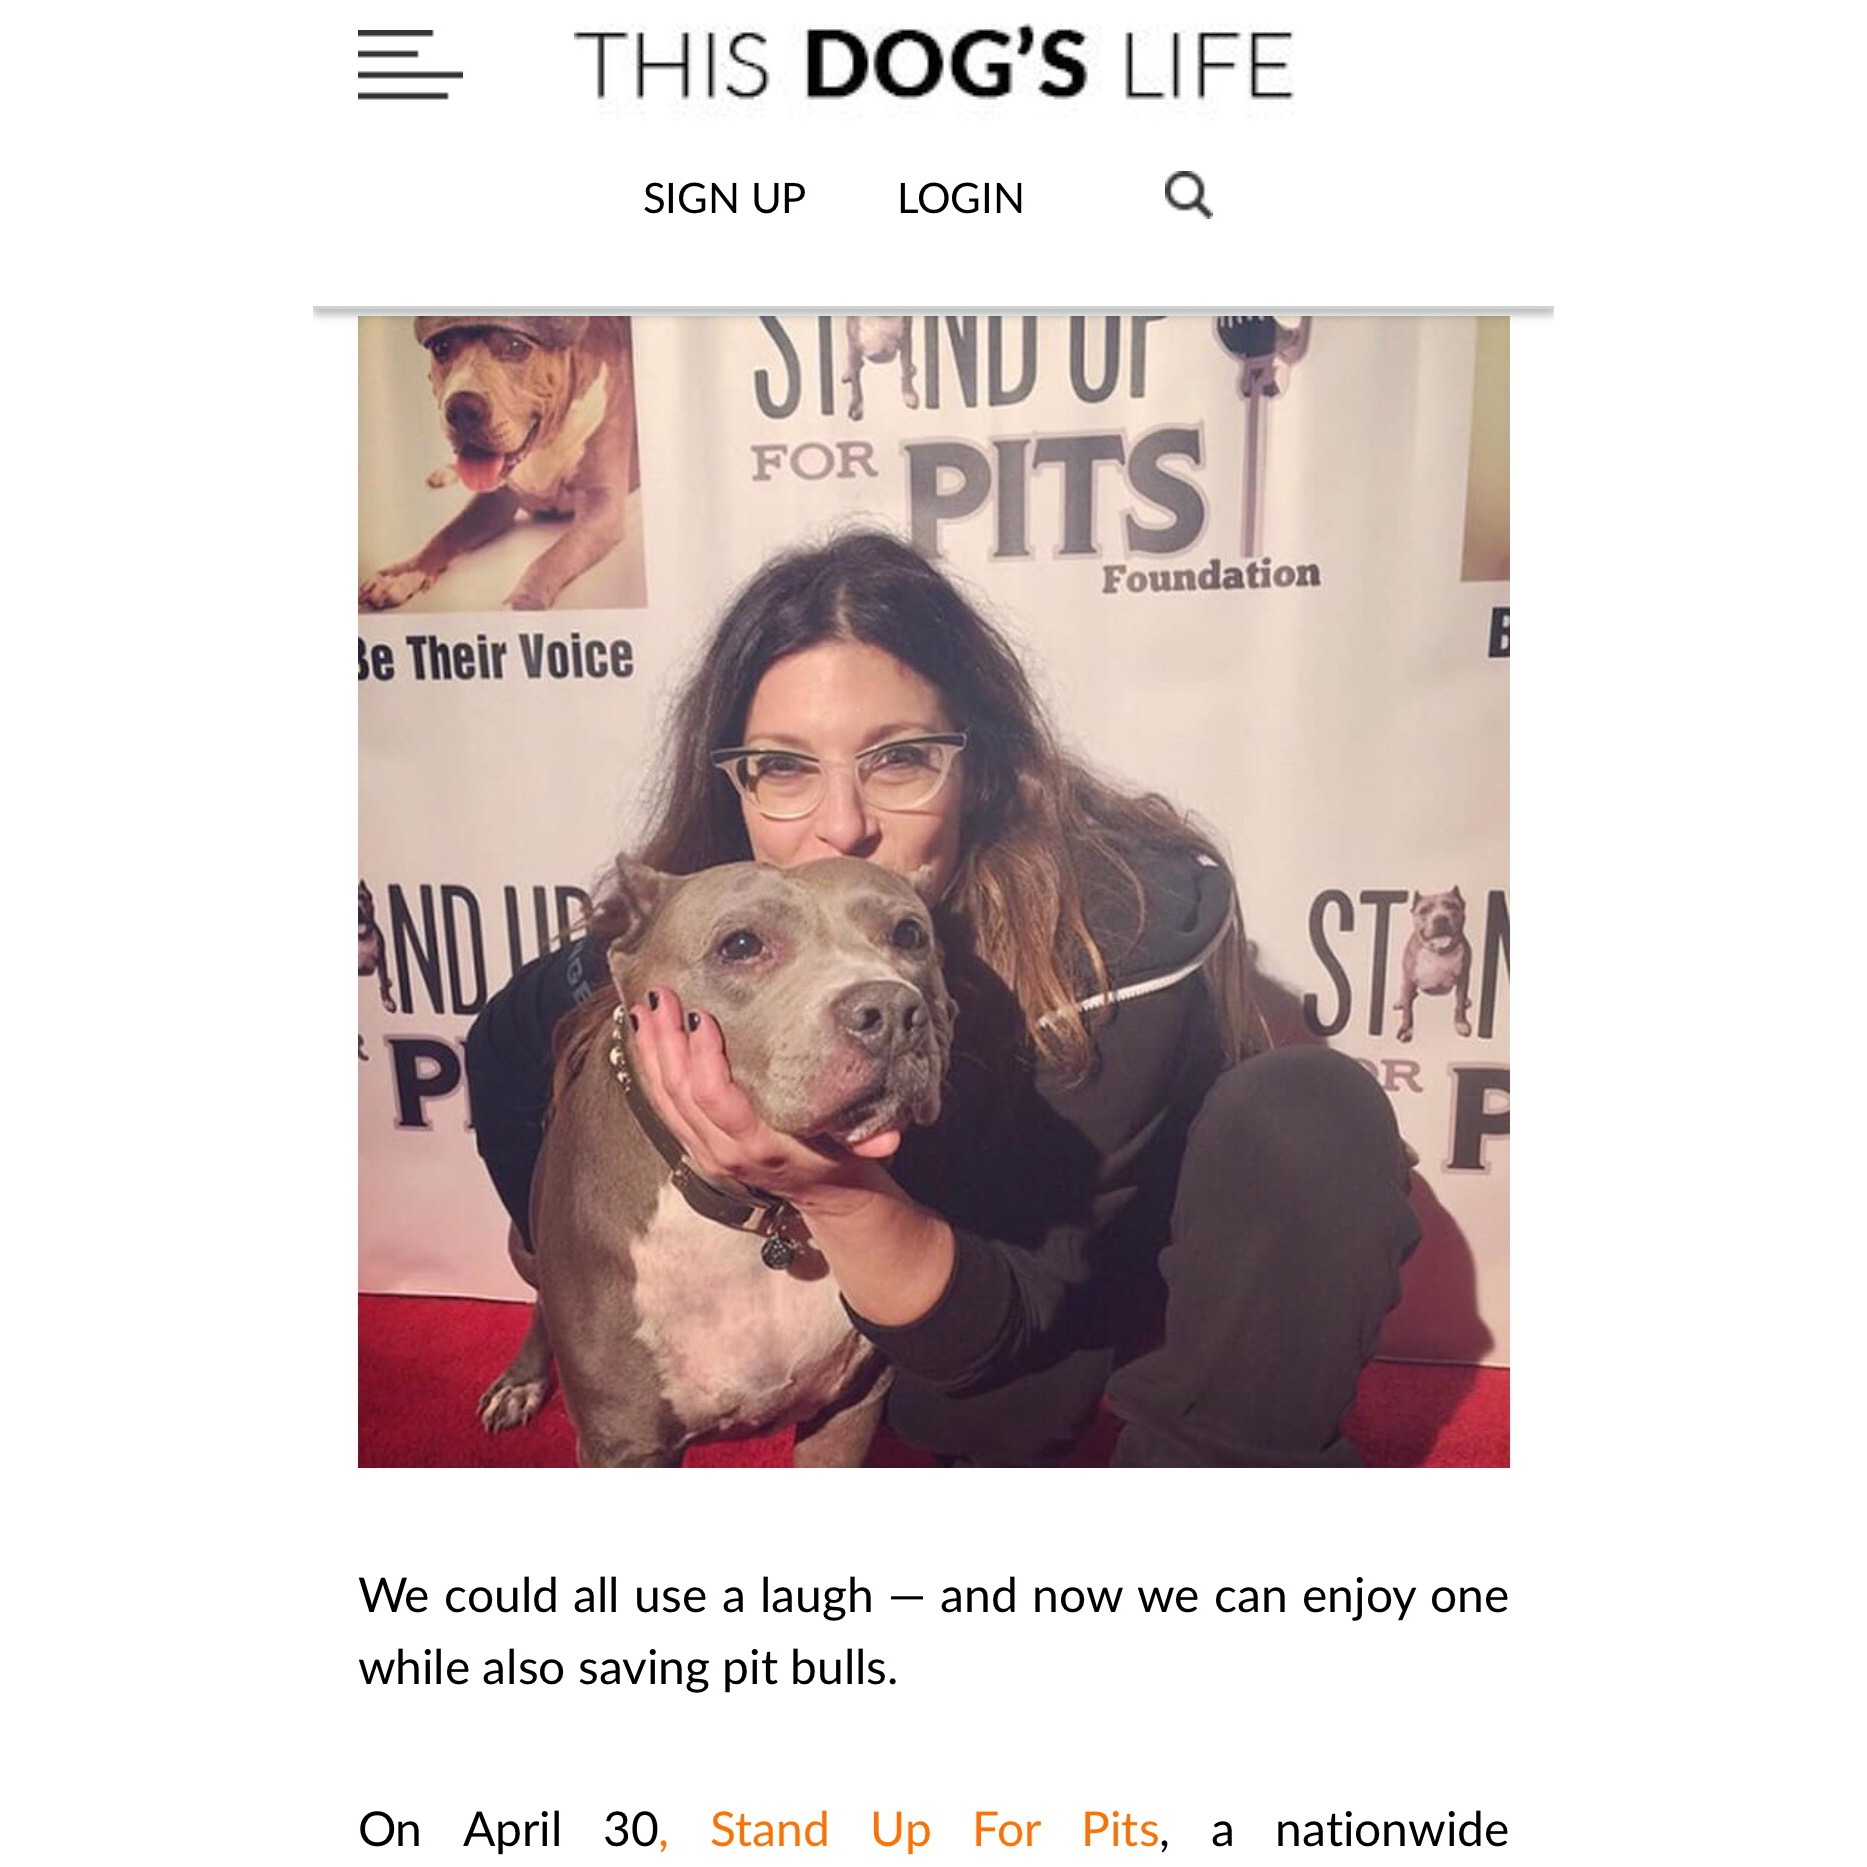 New piece in This Dog’s Life on NEW YORK Stand Up For Pits!